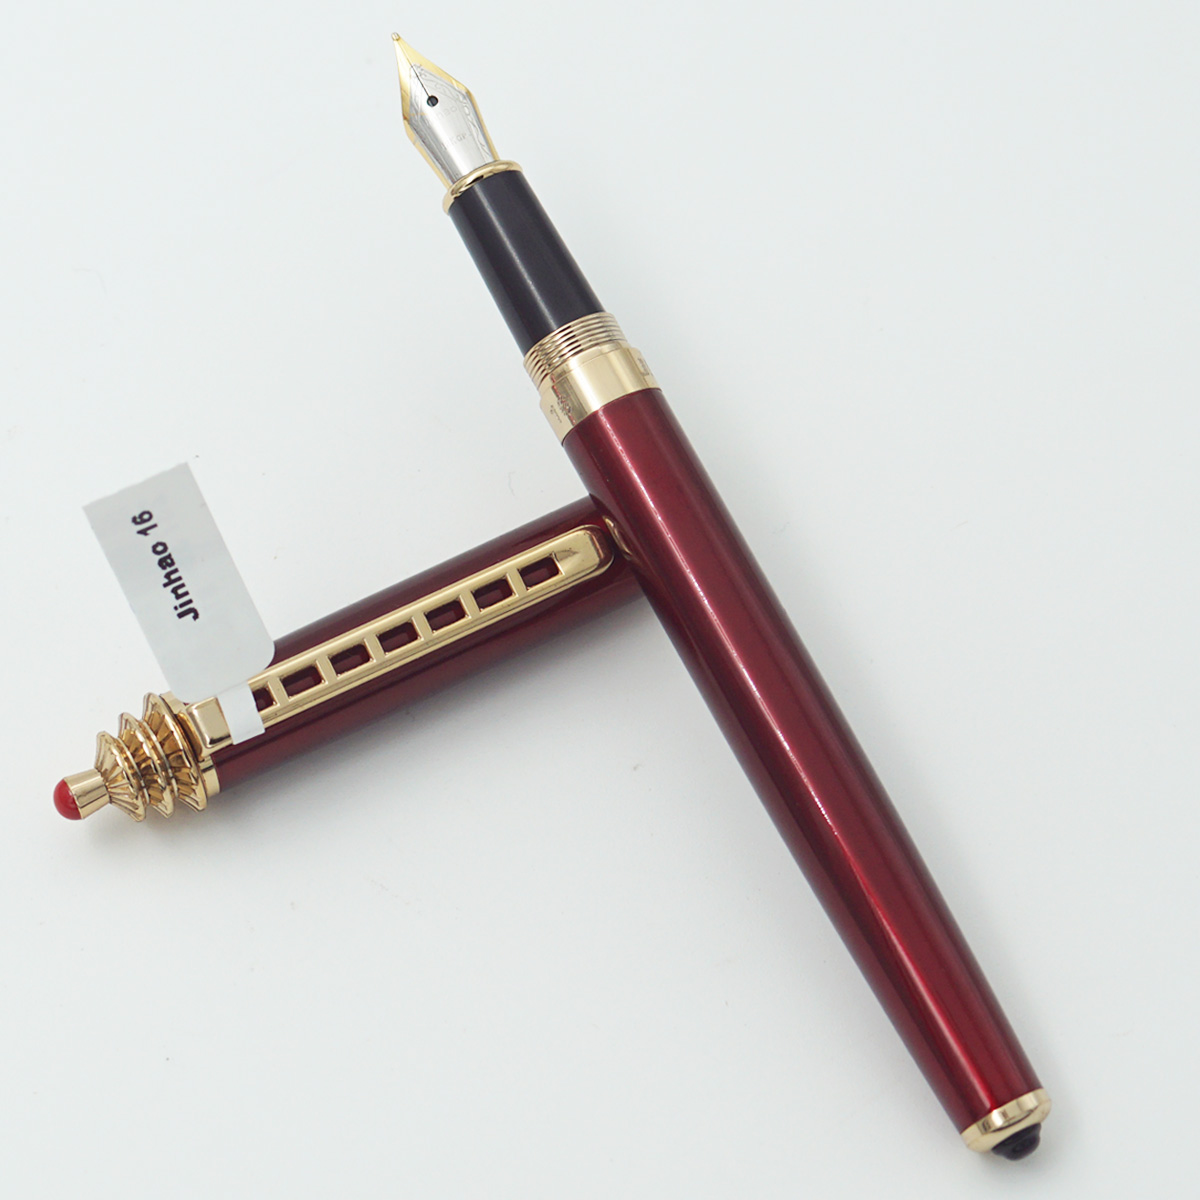 Jinhao 16 Glossy Maroon Color Body With Design On Cap And Golden Color Clip Fine Nib Converter Type Fountain Pen SKU 23735